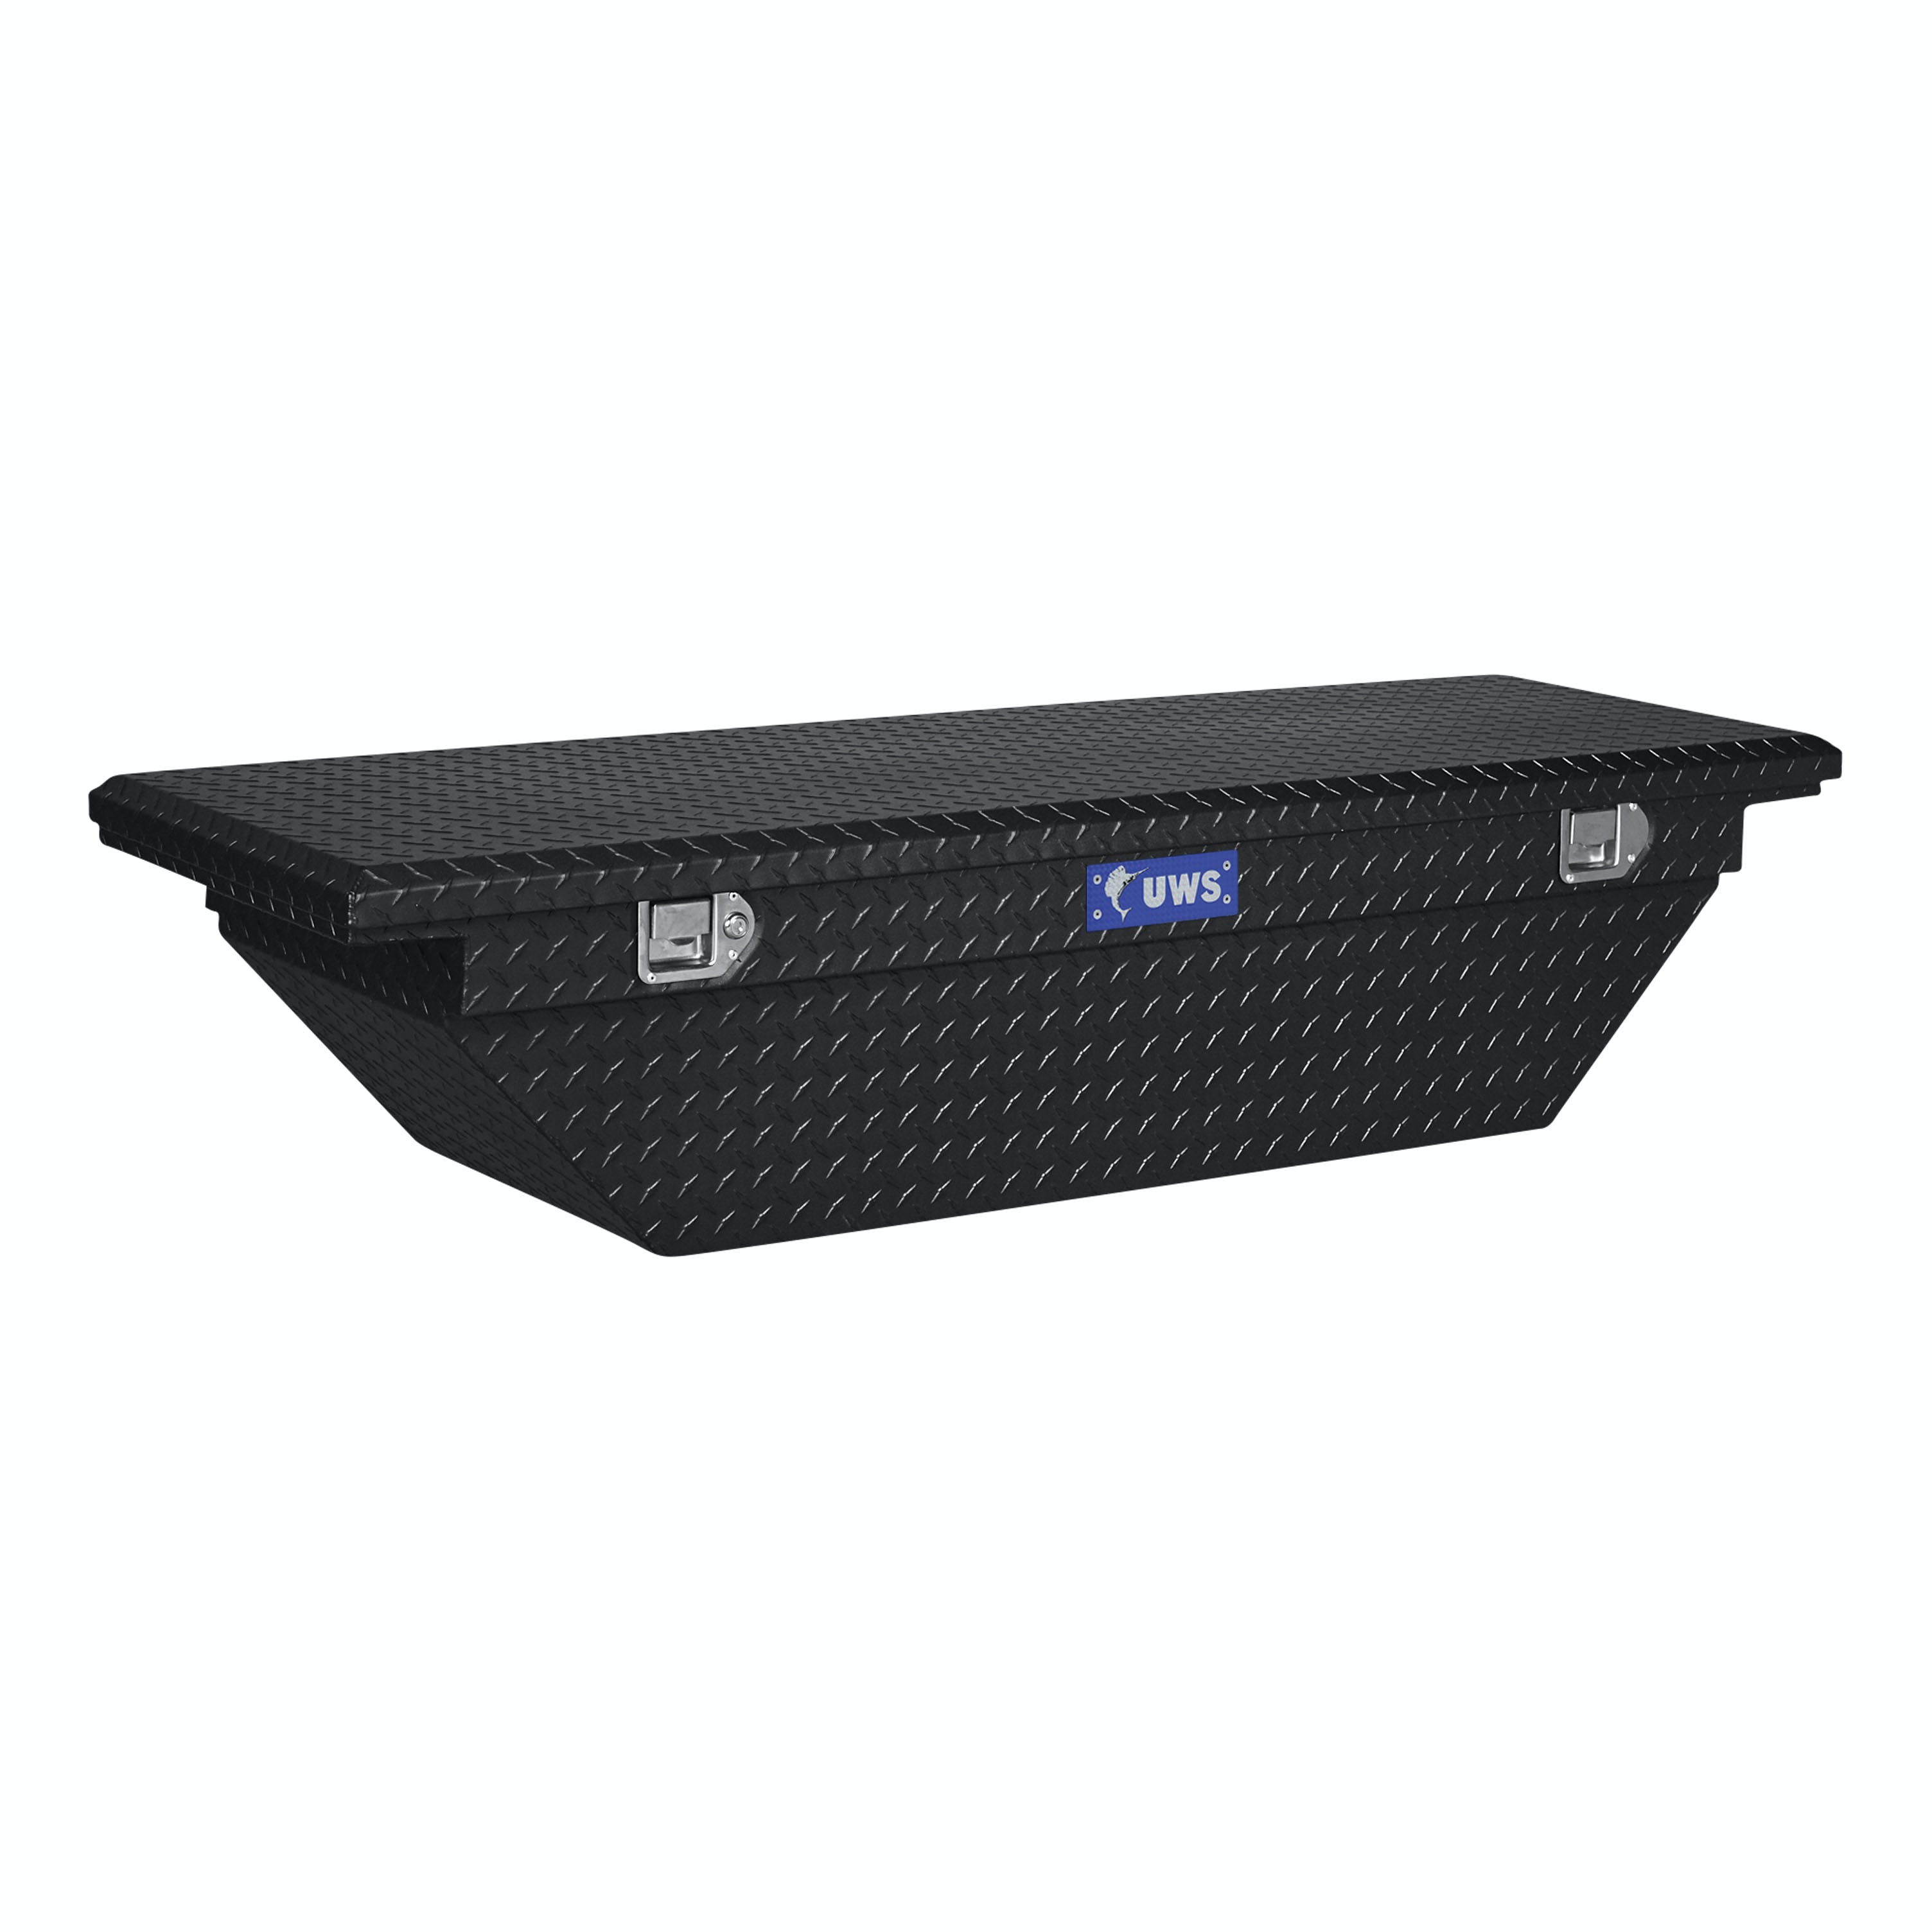 UWS TBS-69-A-LP-BLK 69 inch Aluminum Single Lid Crossover Toolbox Low Profile Angled Black